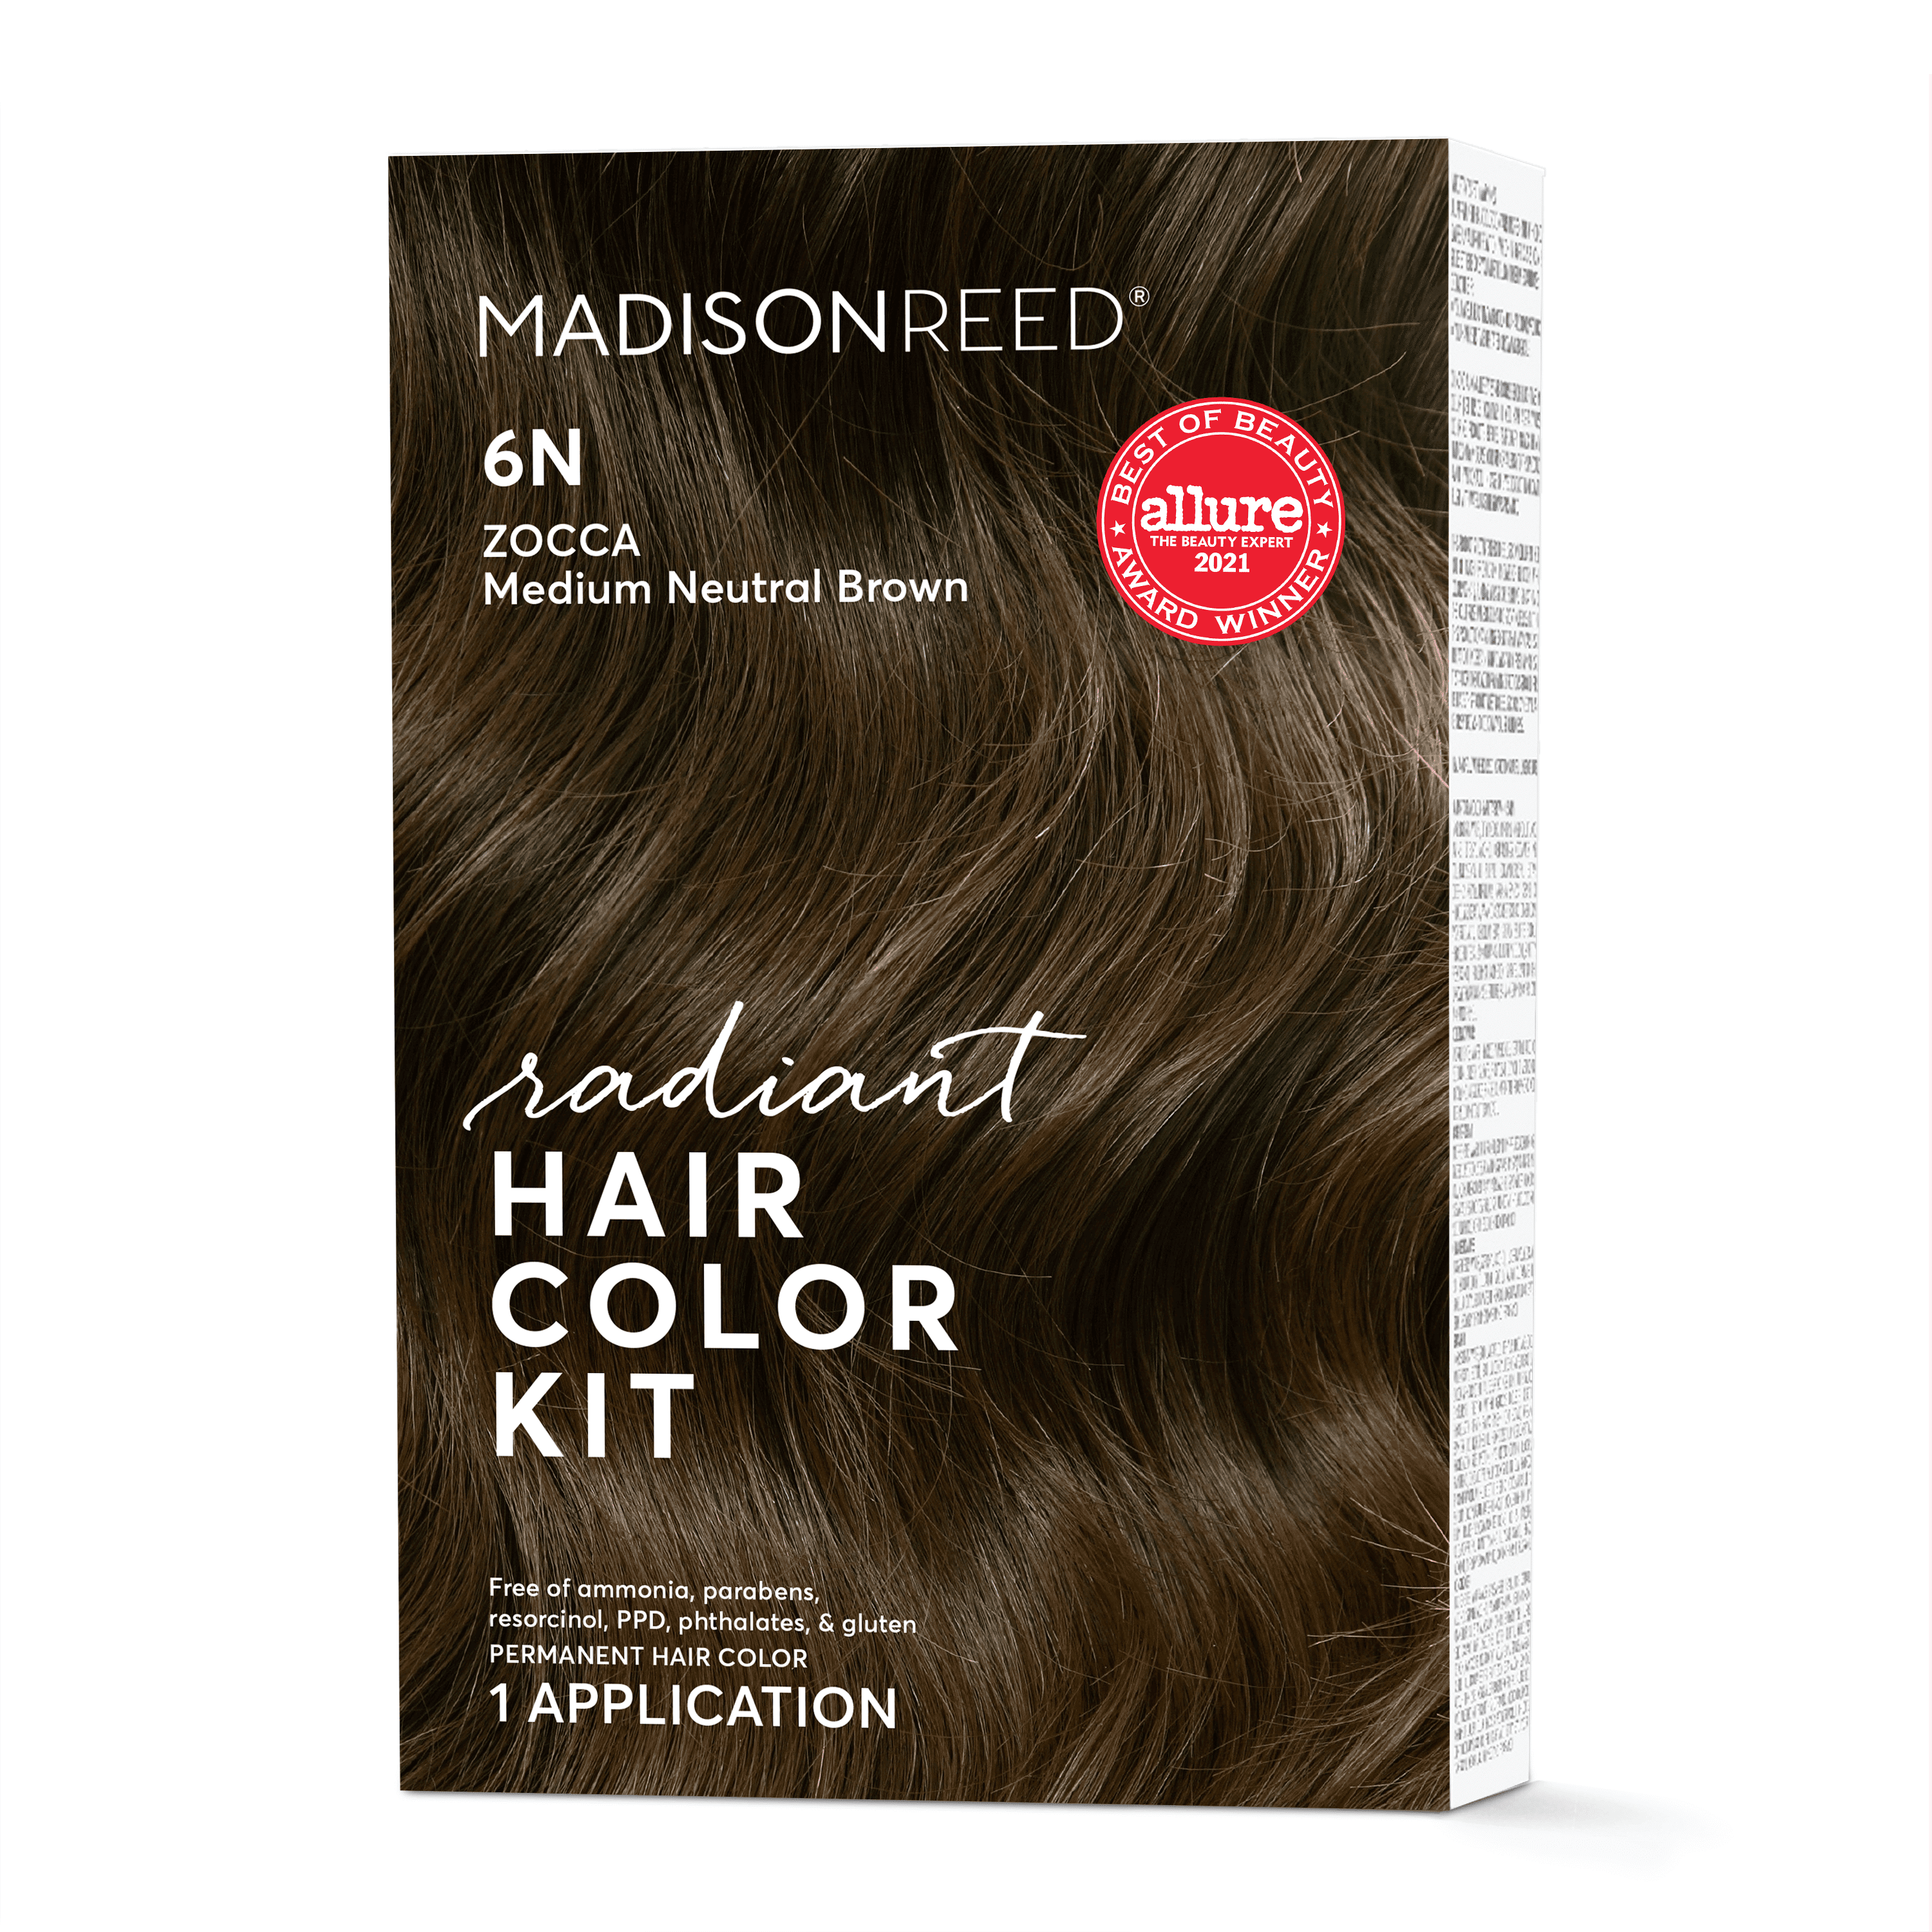 Madison Reed Radiant Hair Color Kit, Zocca Brown (6N), Medium Neutral Brown,  8 piece kit 